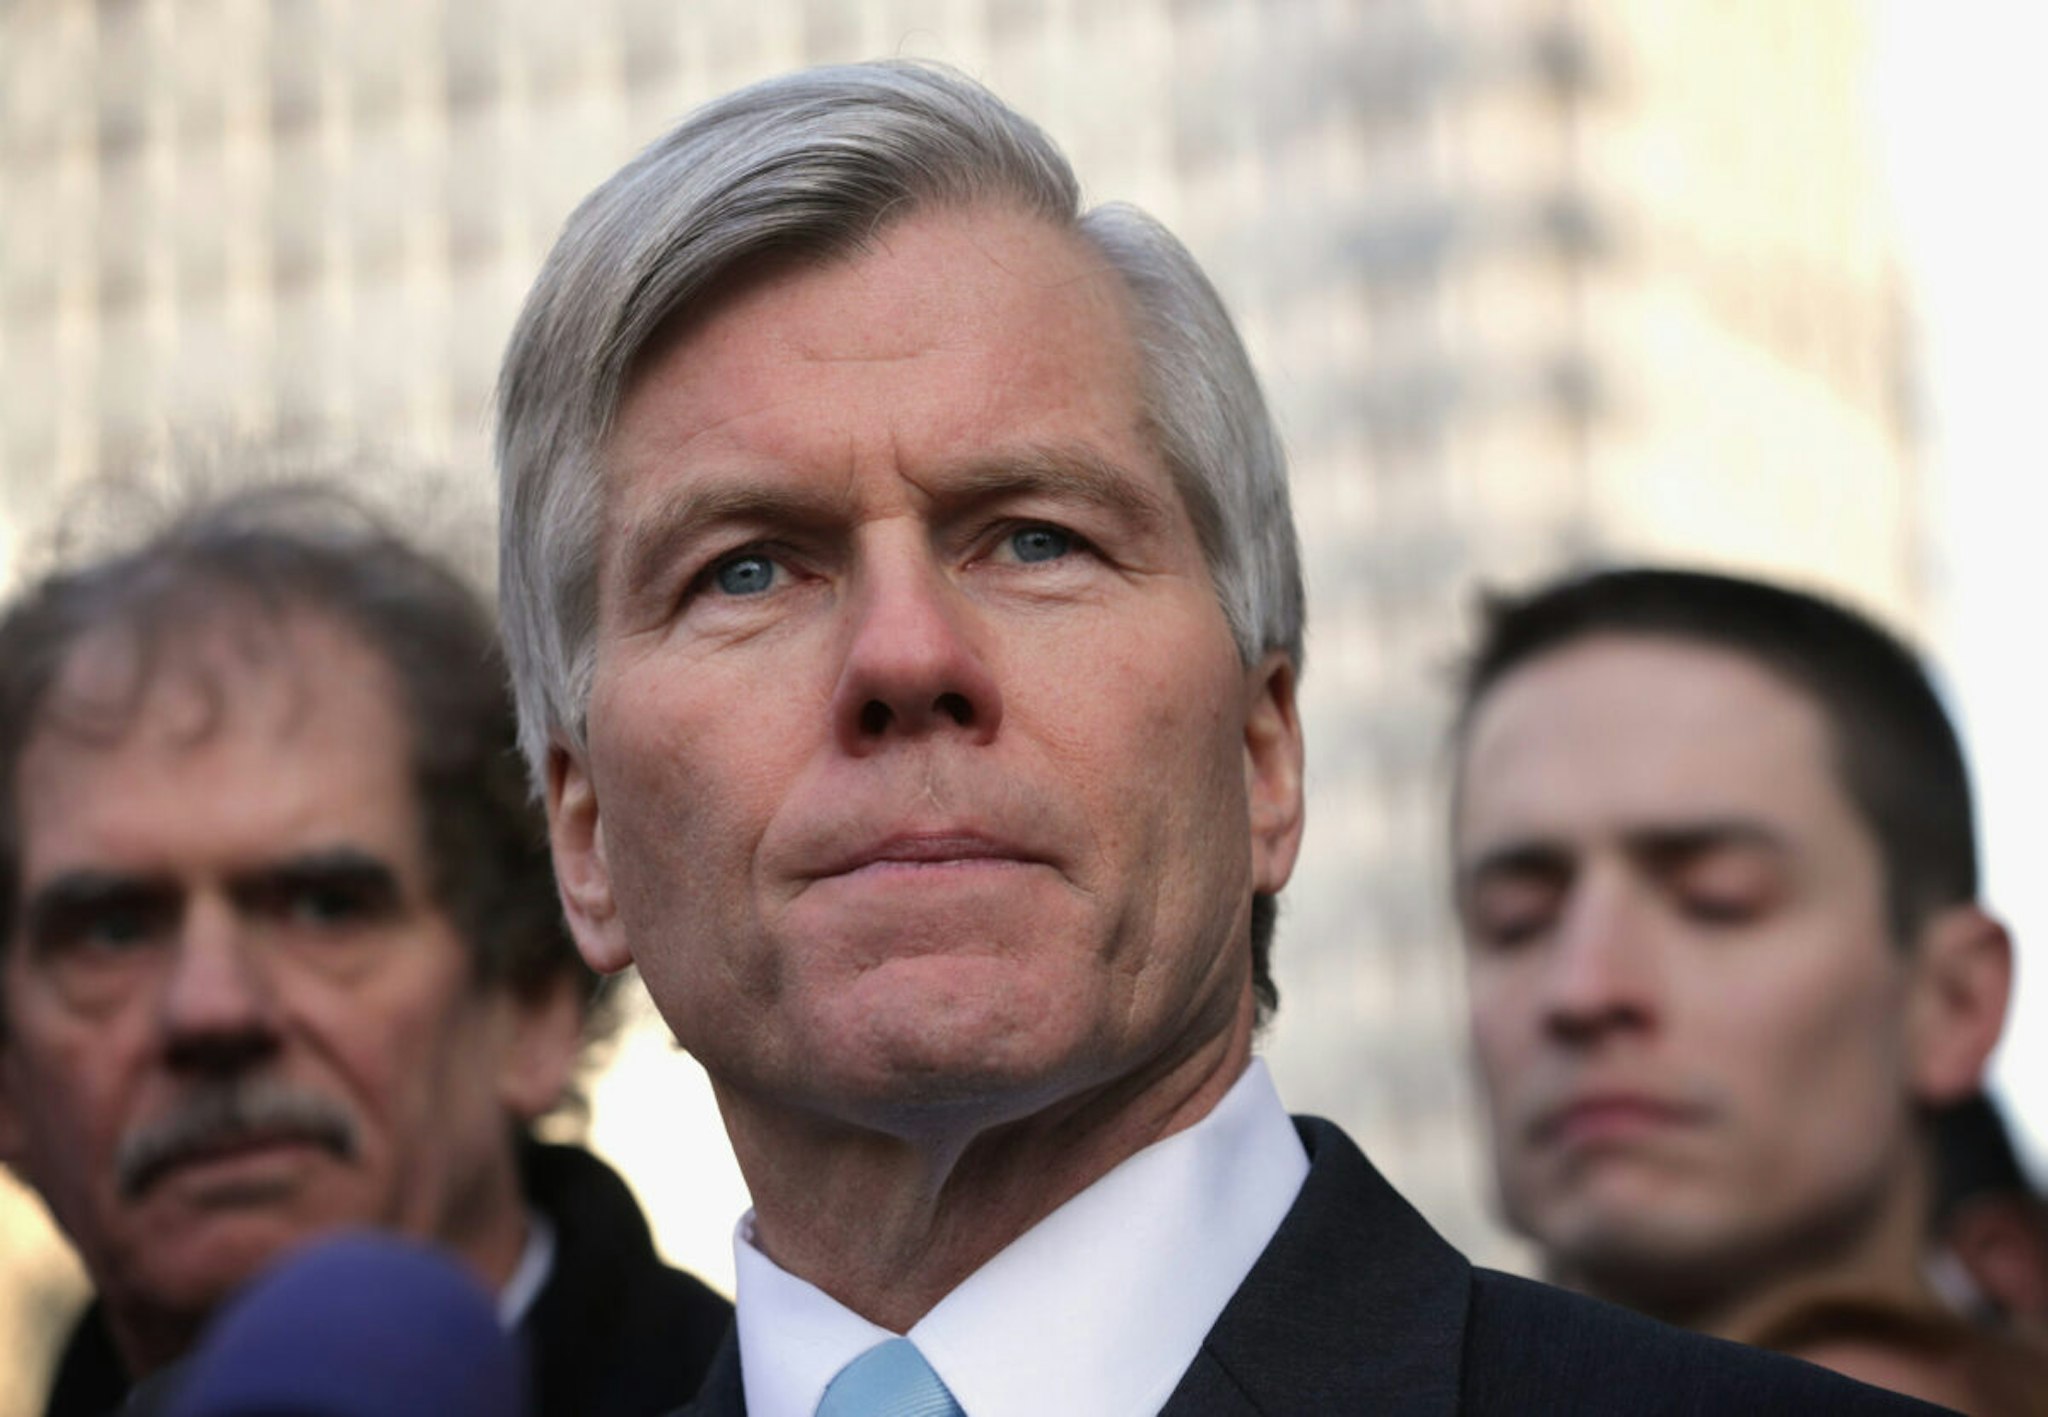 Former Virginia Governor Robert McDonnell (C) pauses as he speaks to members of the media outside U.S. District Court for the Eastern District of Virginia after his sentencing was announced by a federal judge January 6, 2015, in Richmond, Virginia. McDonnell was sentenced 24 months in prison for 11 counts of corruption charges.